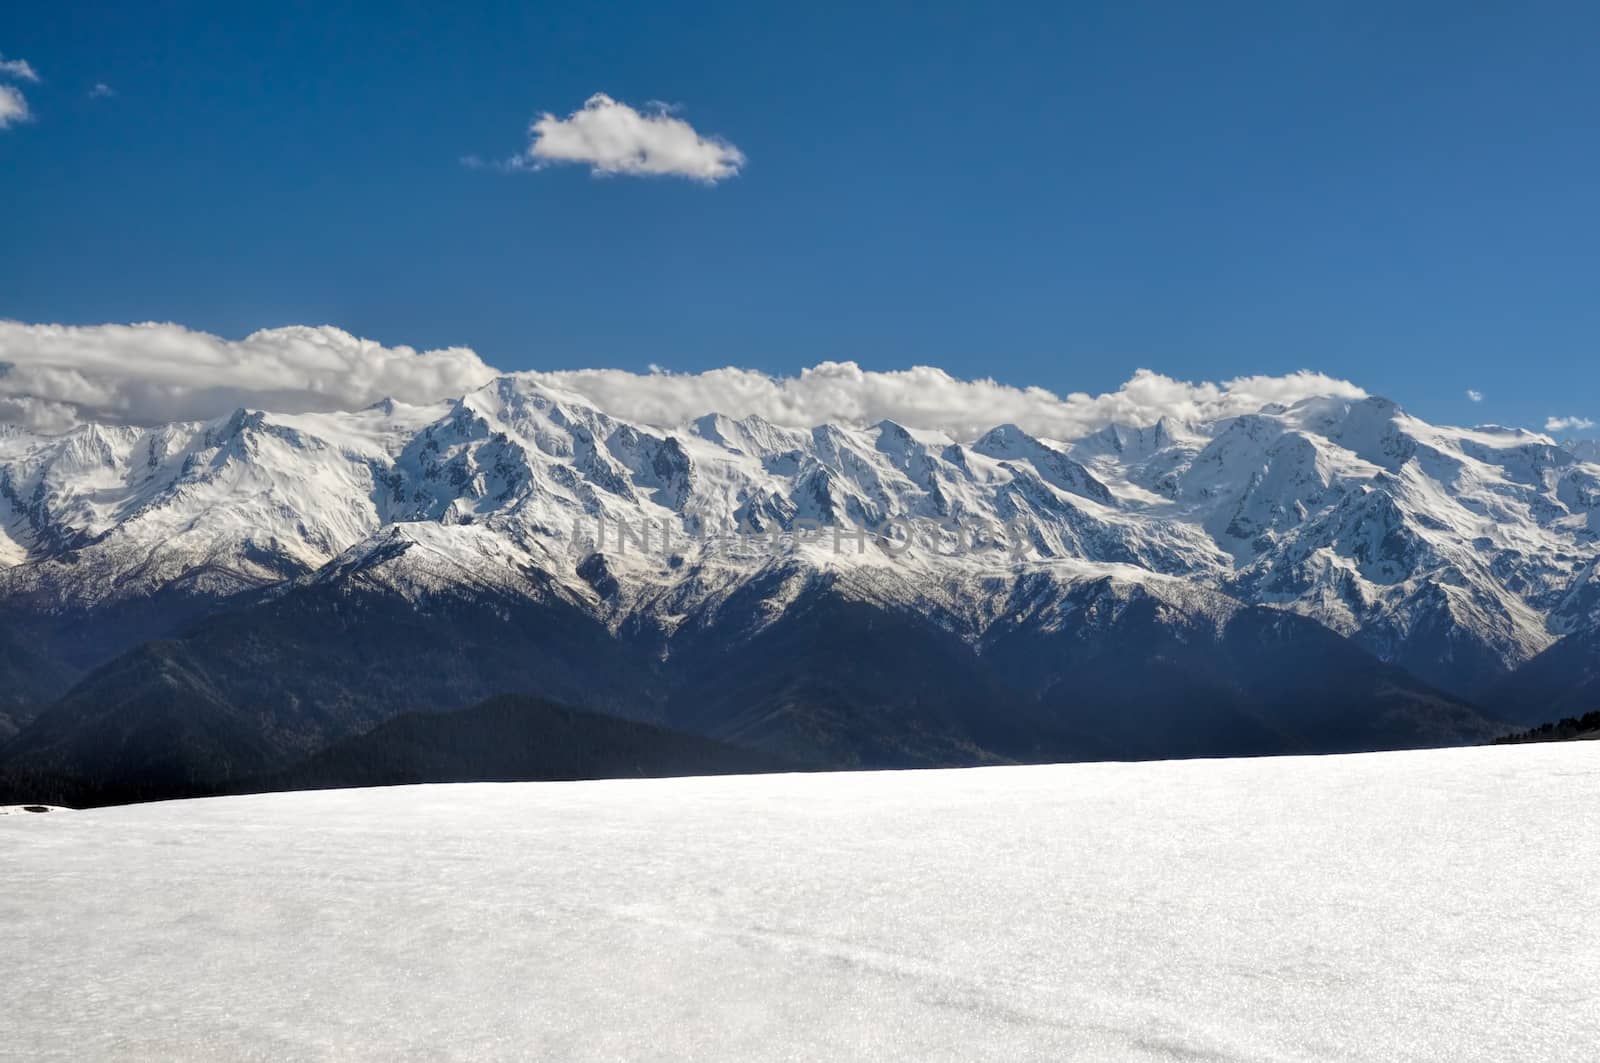 Panoramic view of peaks of Caucasus Mountains covered in snow, Svaneti Province